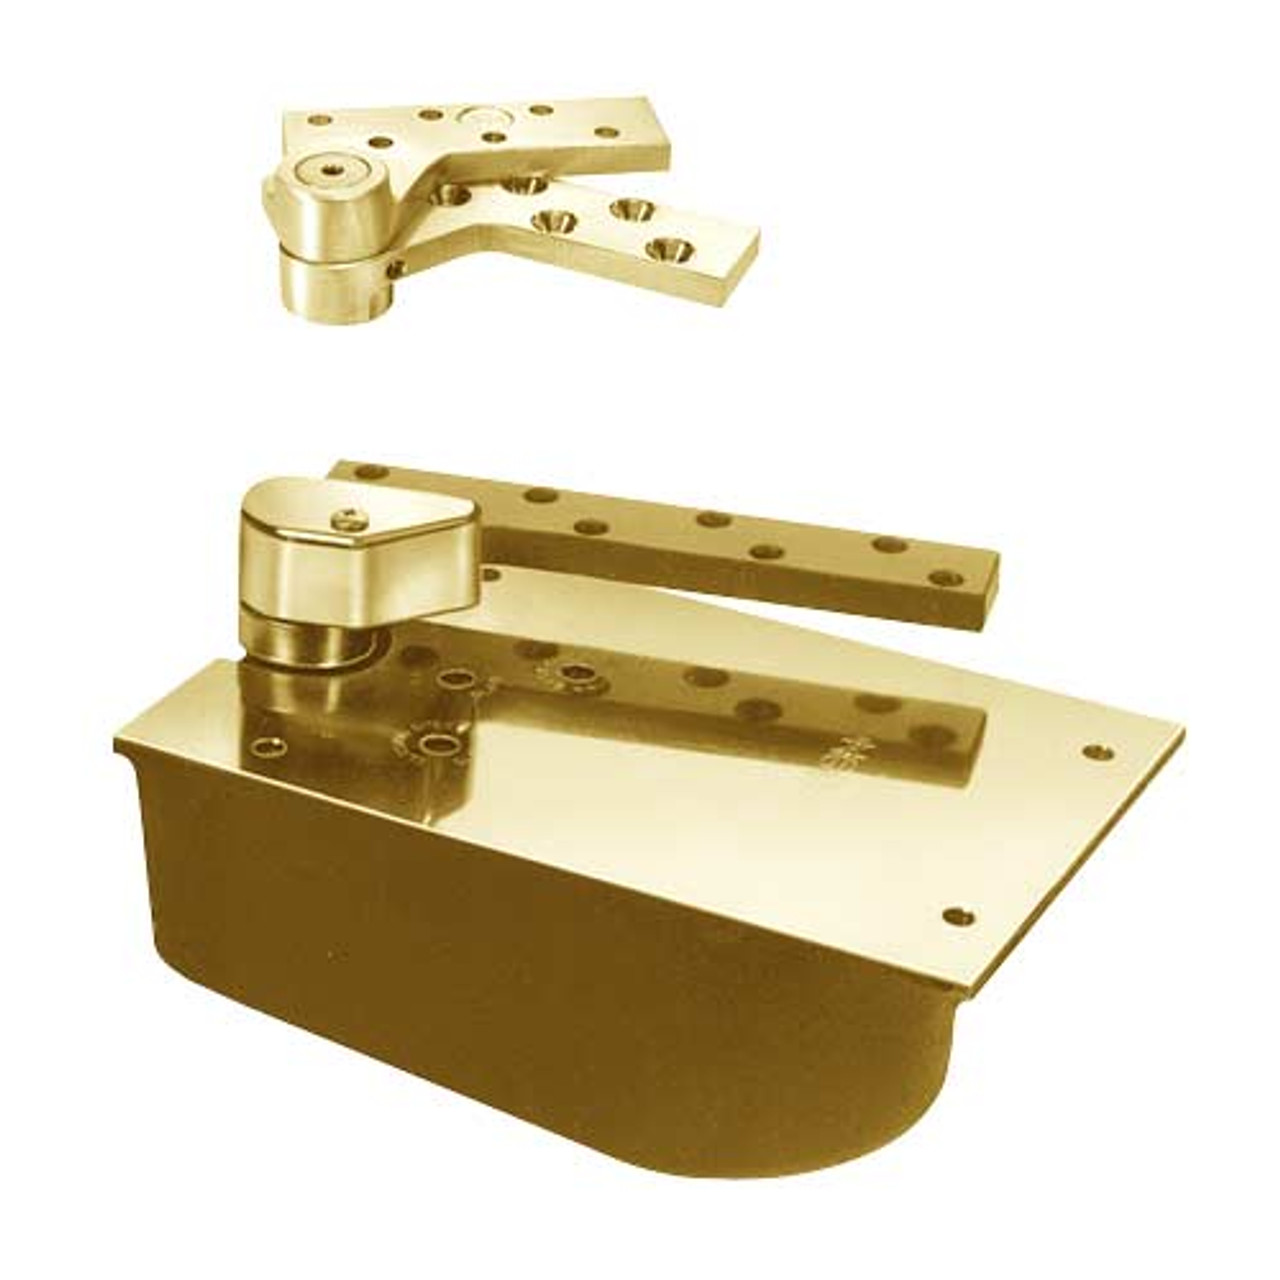 L27-90N-LFP-RH-2-1/2-605 Rixson 27 Series Extra Heavy Duty Lead Lined Offset Floor Closer in Bright Brass Finish